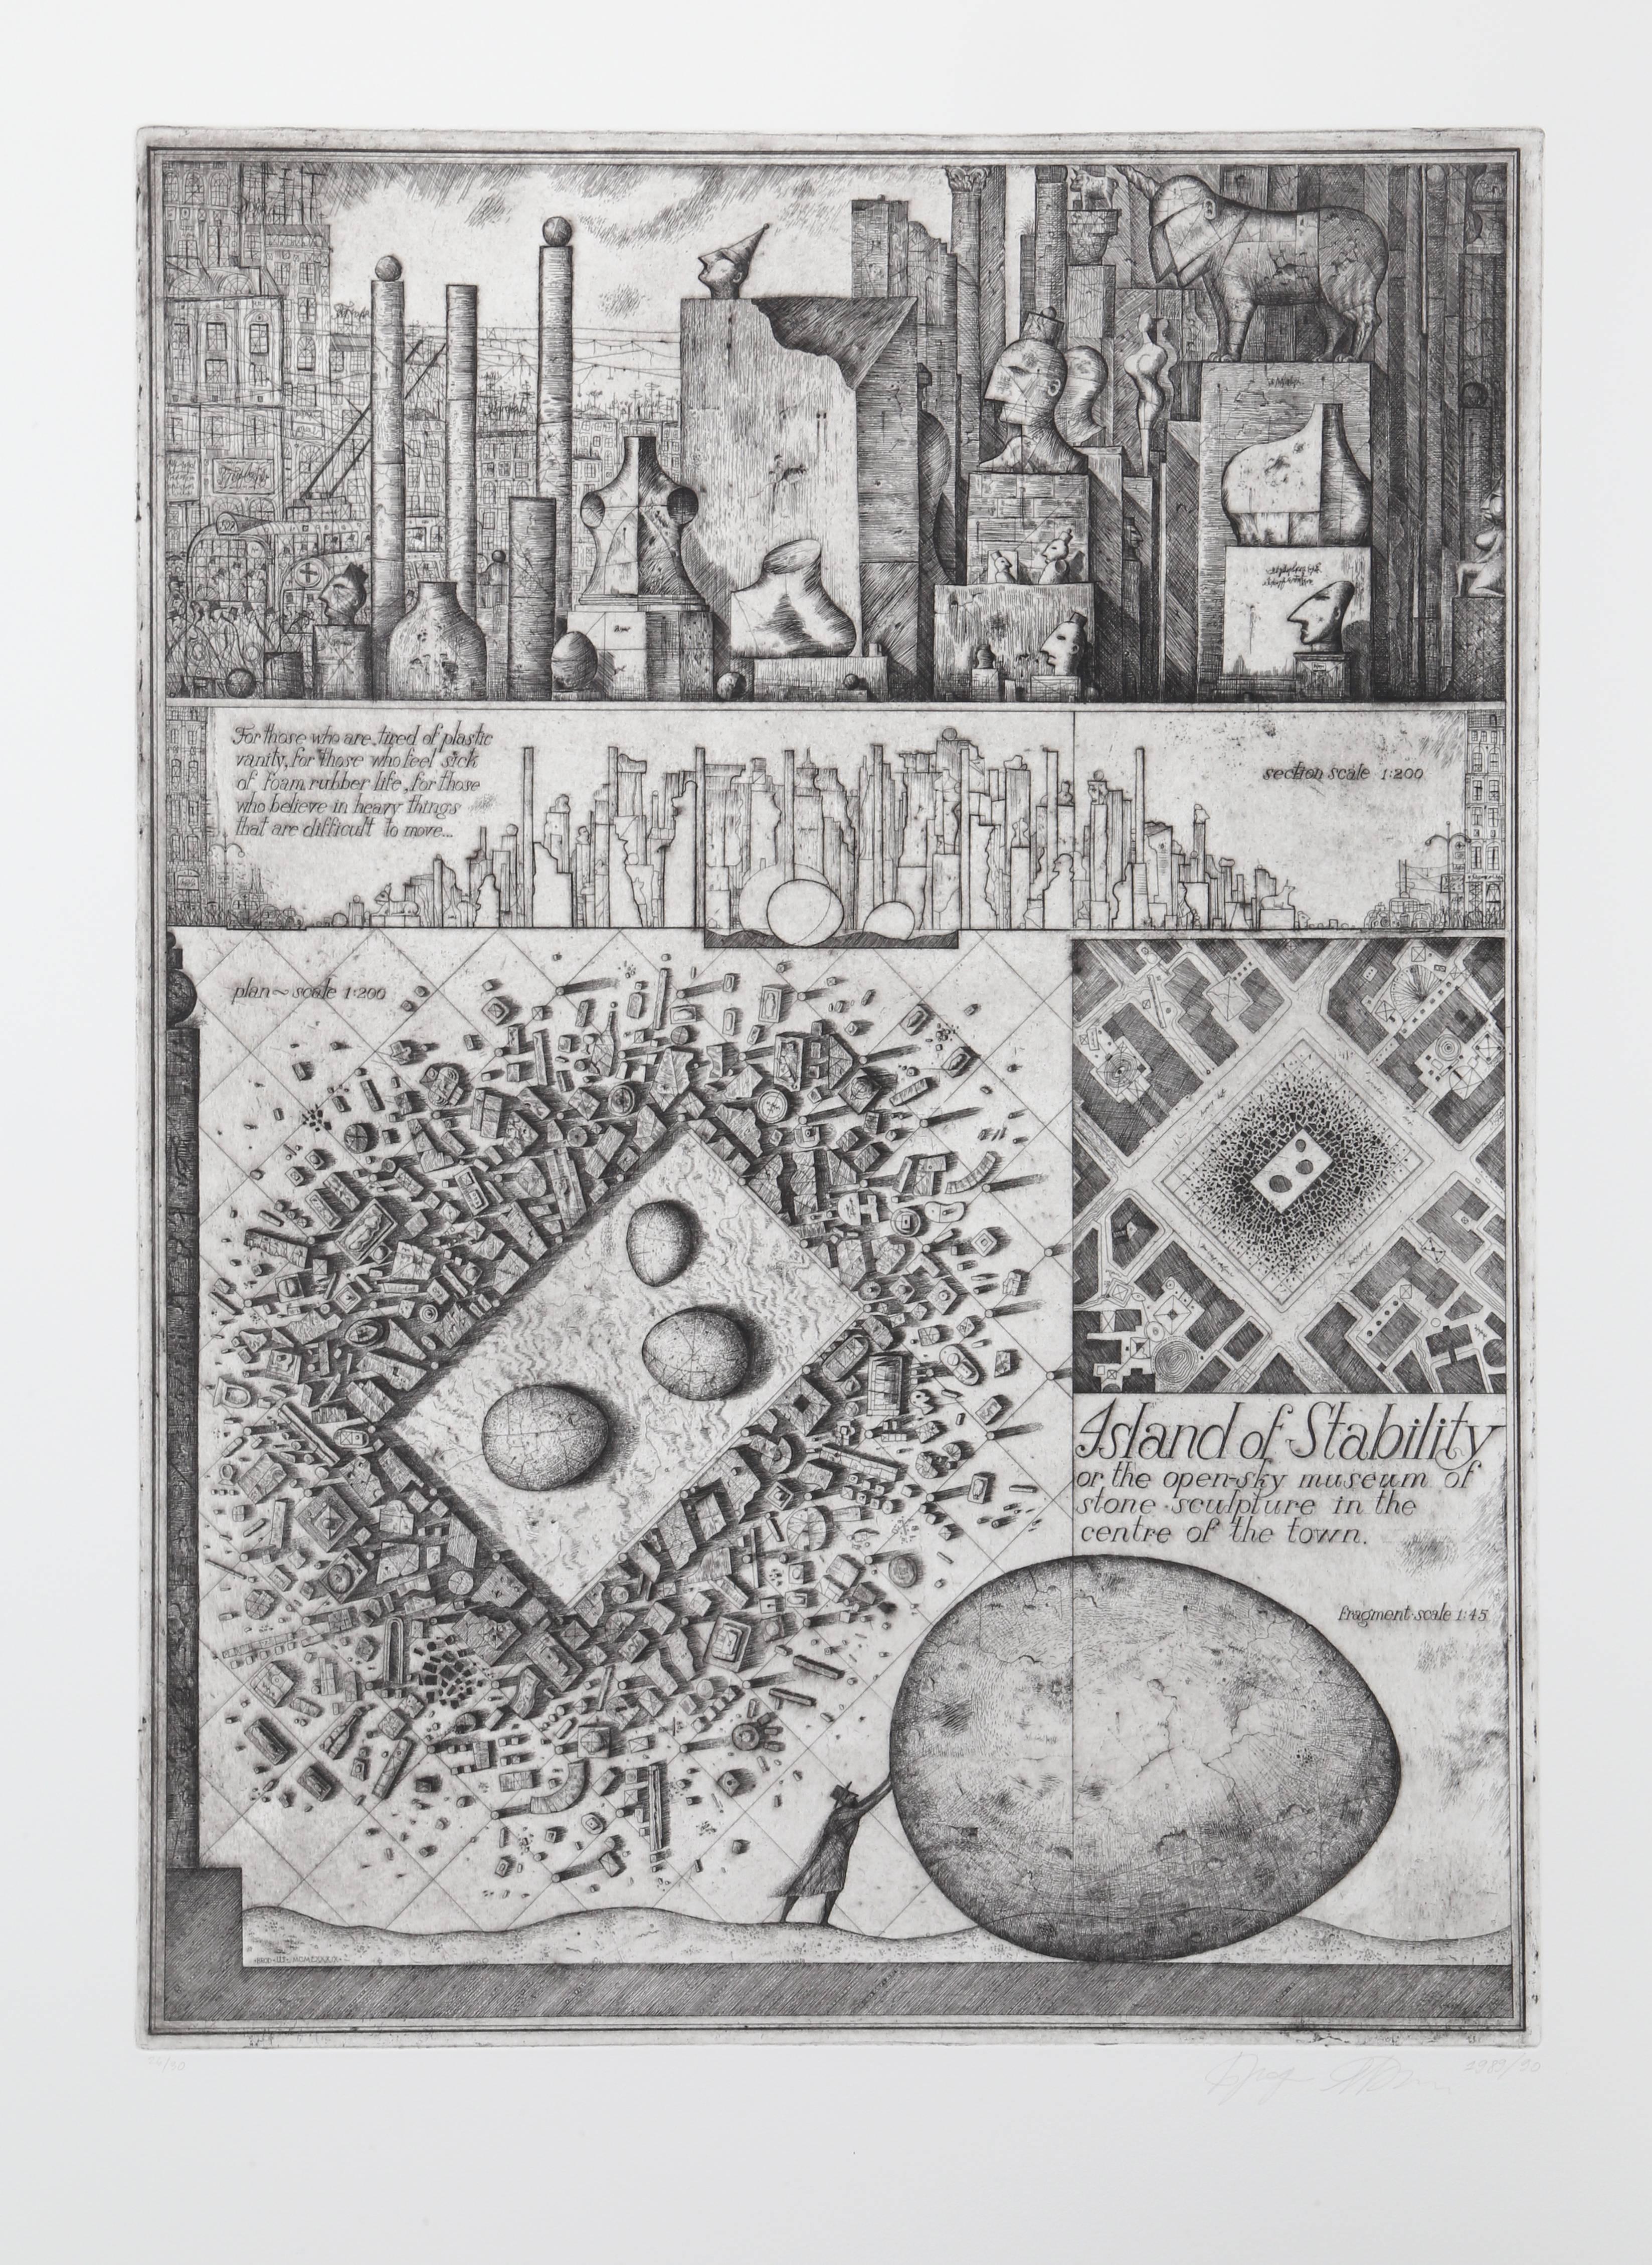 Alexander Brodsky and Ilya Utkin Abstract Print - Island of Stability from Brodsky and Utkin: Projects 1981 - 1990